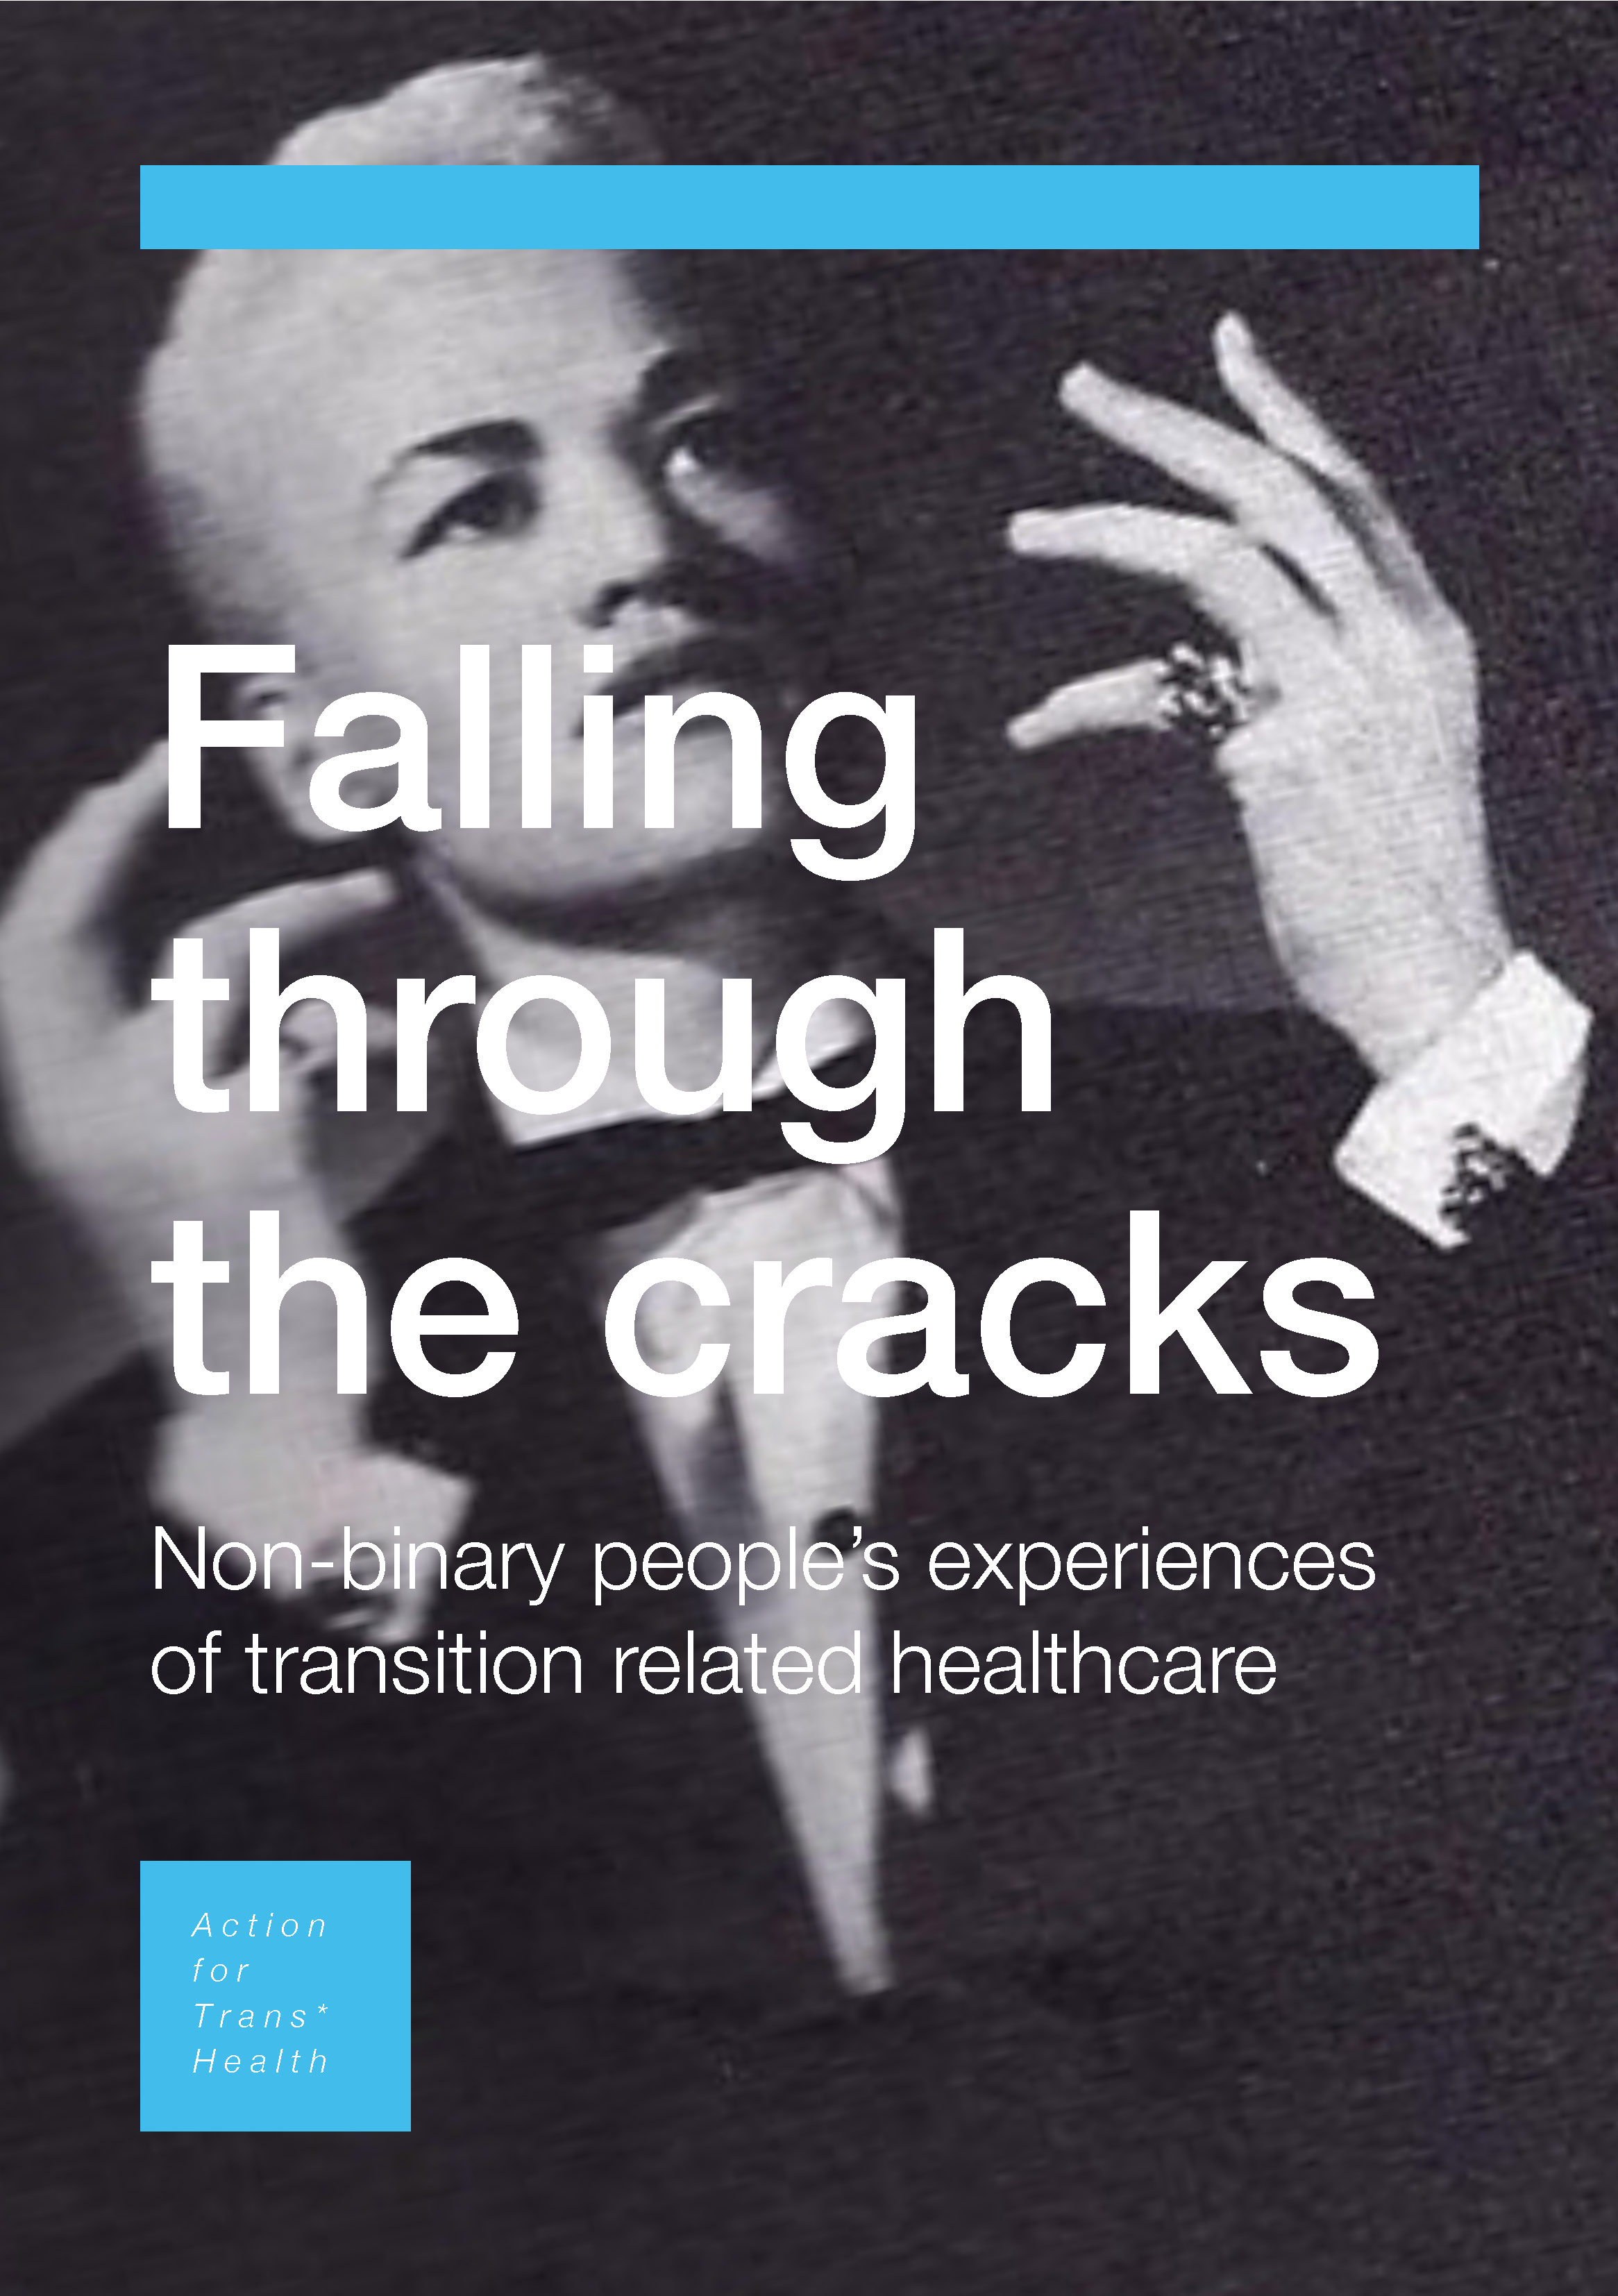 Cover of Falling Through The Cracks publication, shows a black and white image of drag king Stormé DeLaverie wearing a tuxedo and bowtie.